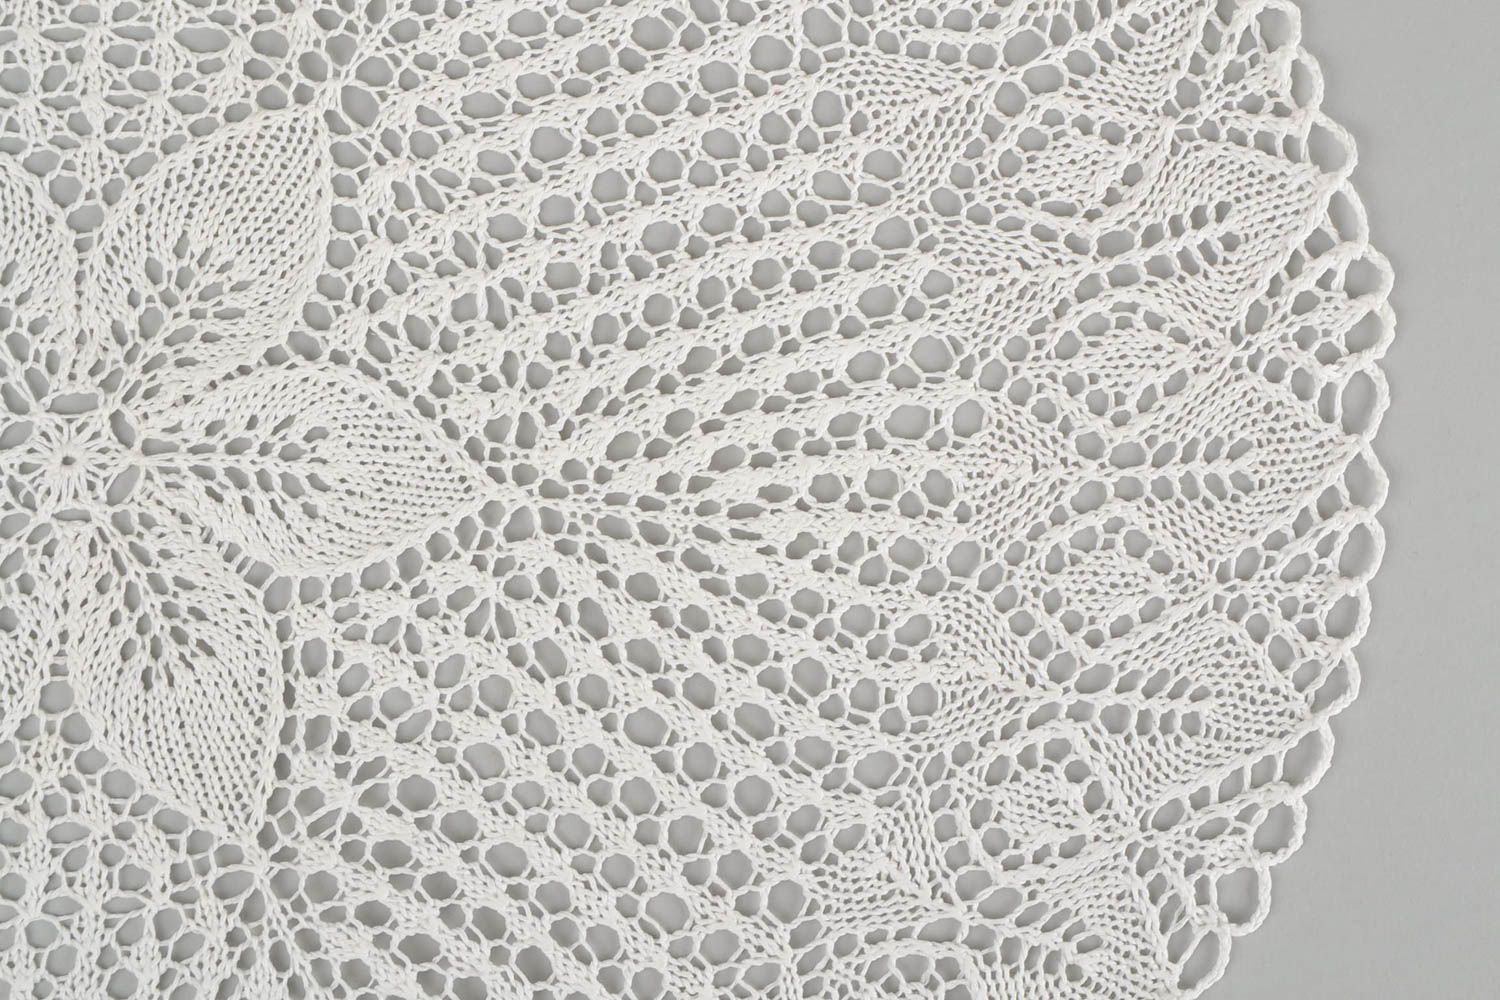 Openwork knitted tablecloth handmade table napkin vintage style interior decor photo 4